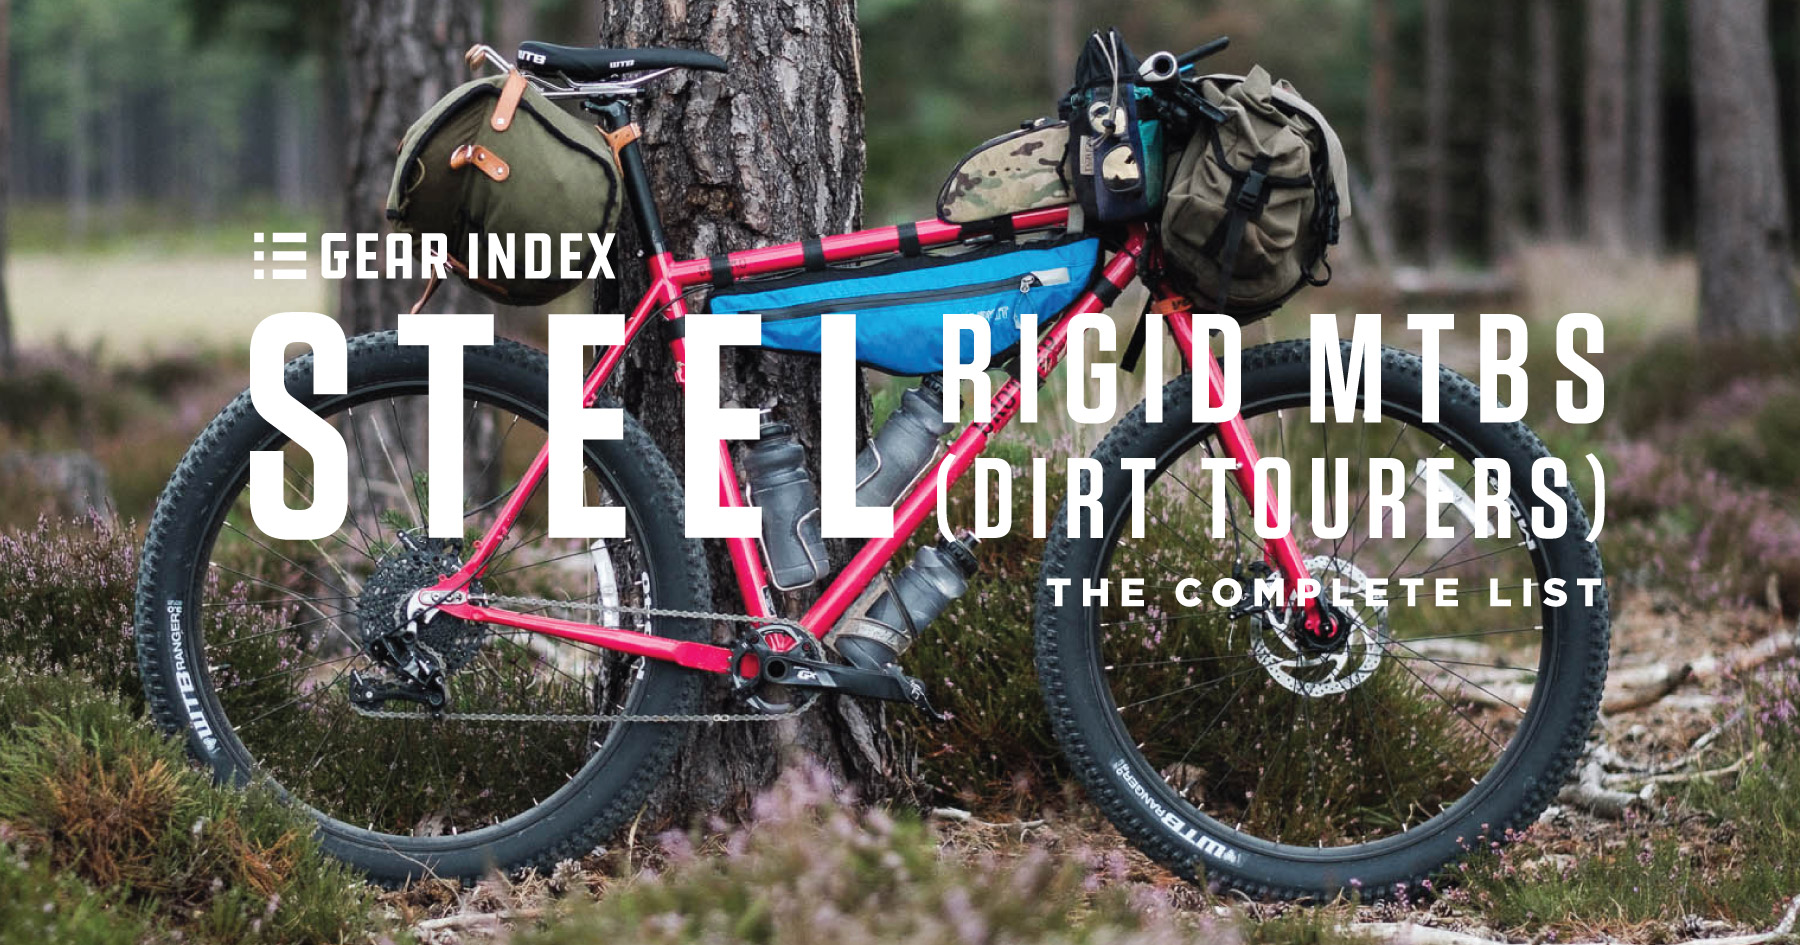 rigid steel mountain bikes and off-road dirt touring bikes